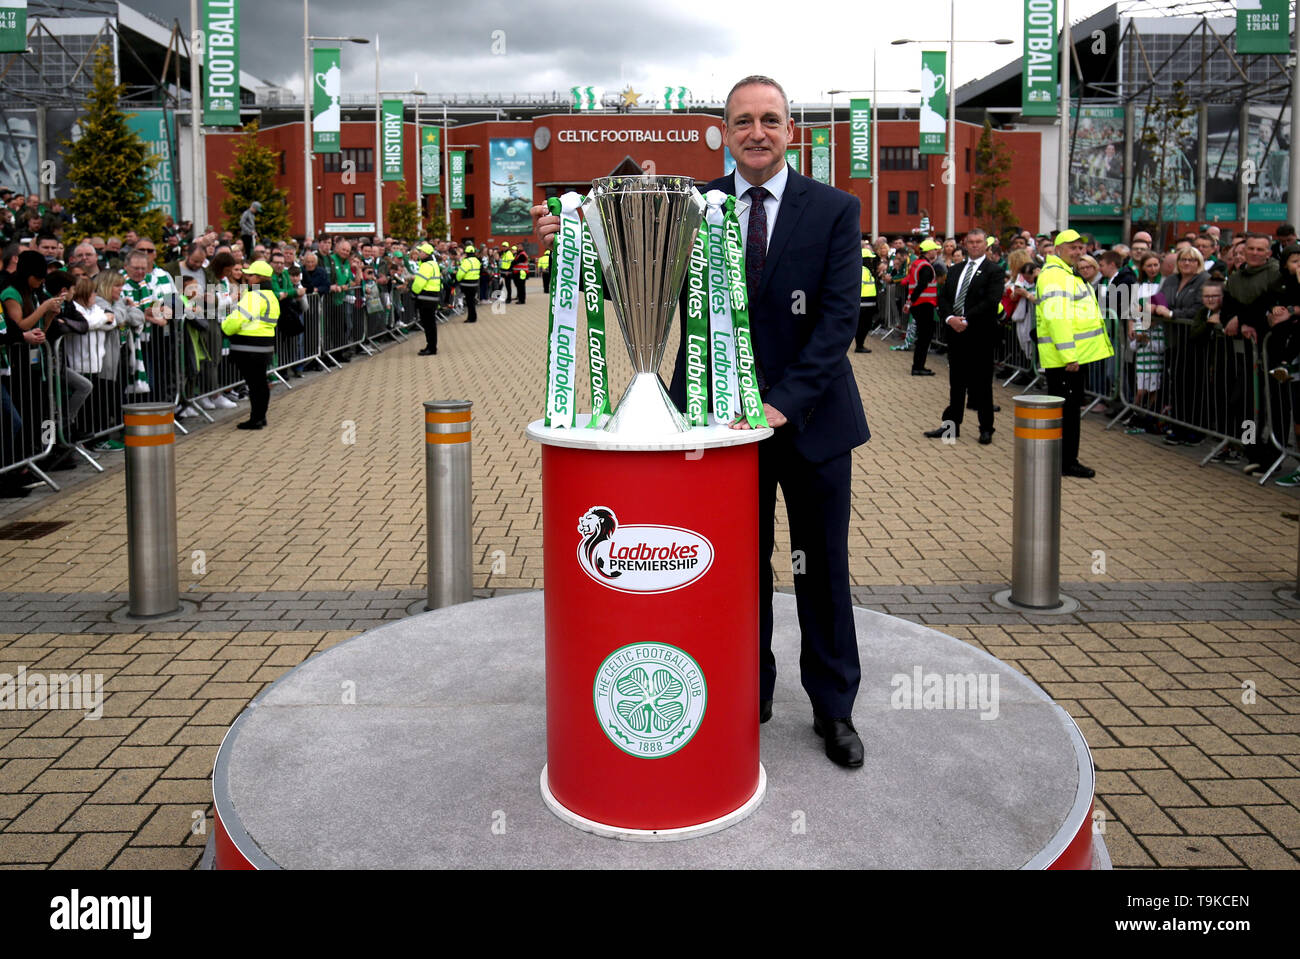 Former Celtic player Paul McStay with the Ladbrokes Scottish Premiership cup prior to the beginning of the Ladbrokes Scottish Premiership match at Celtic Park, Glasgow. Stock Photo